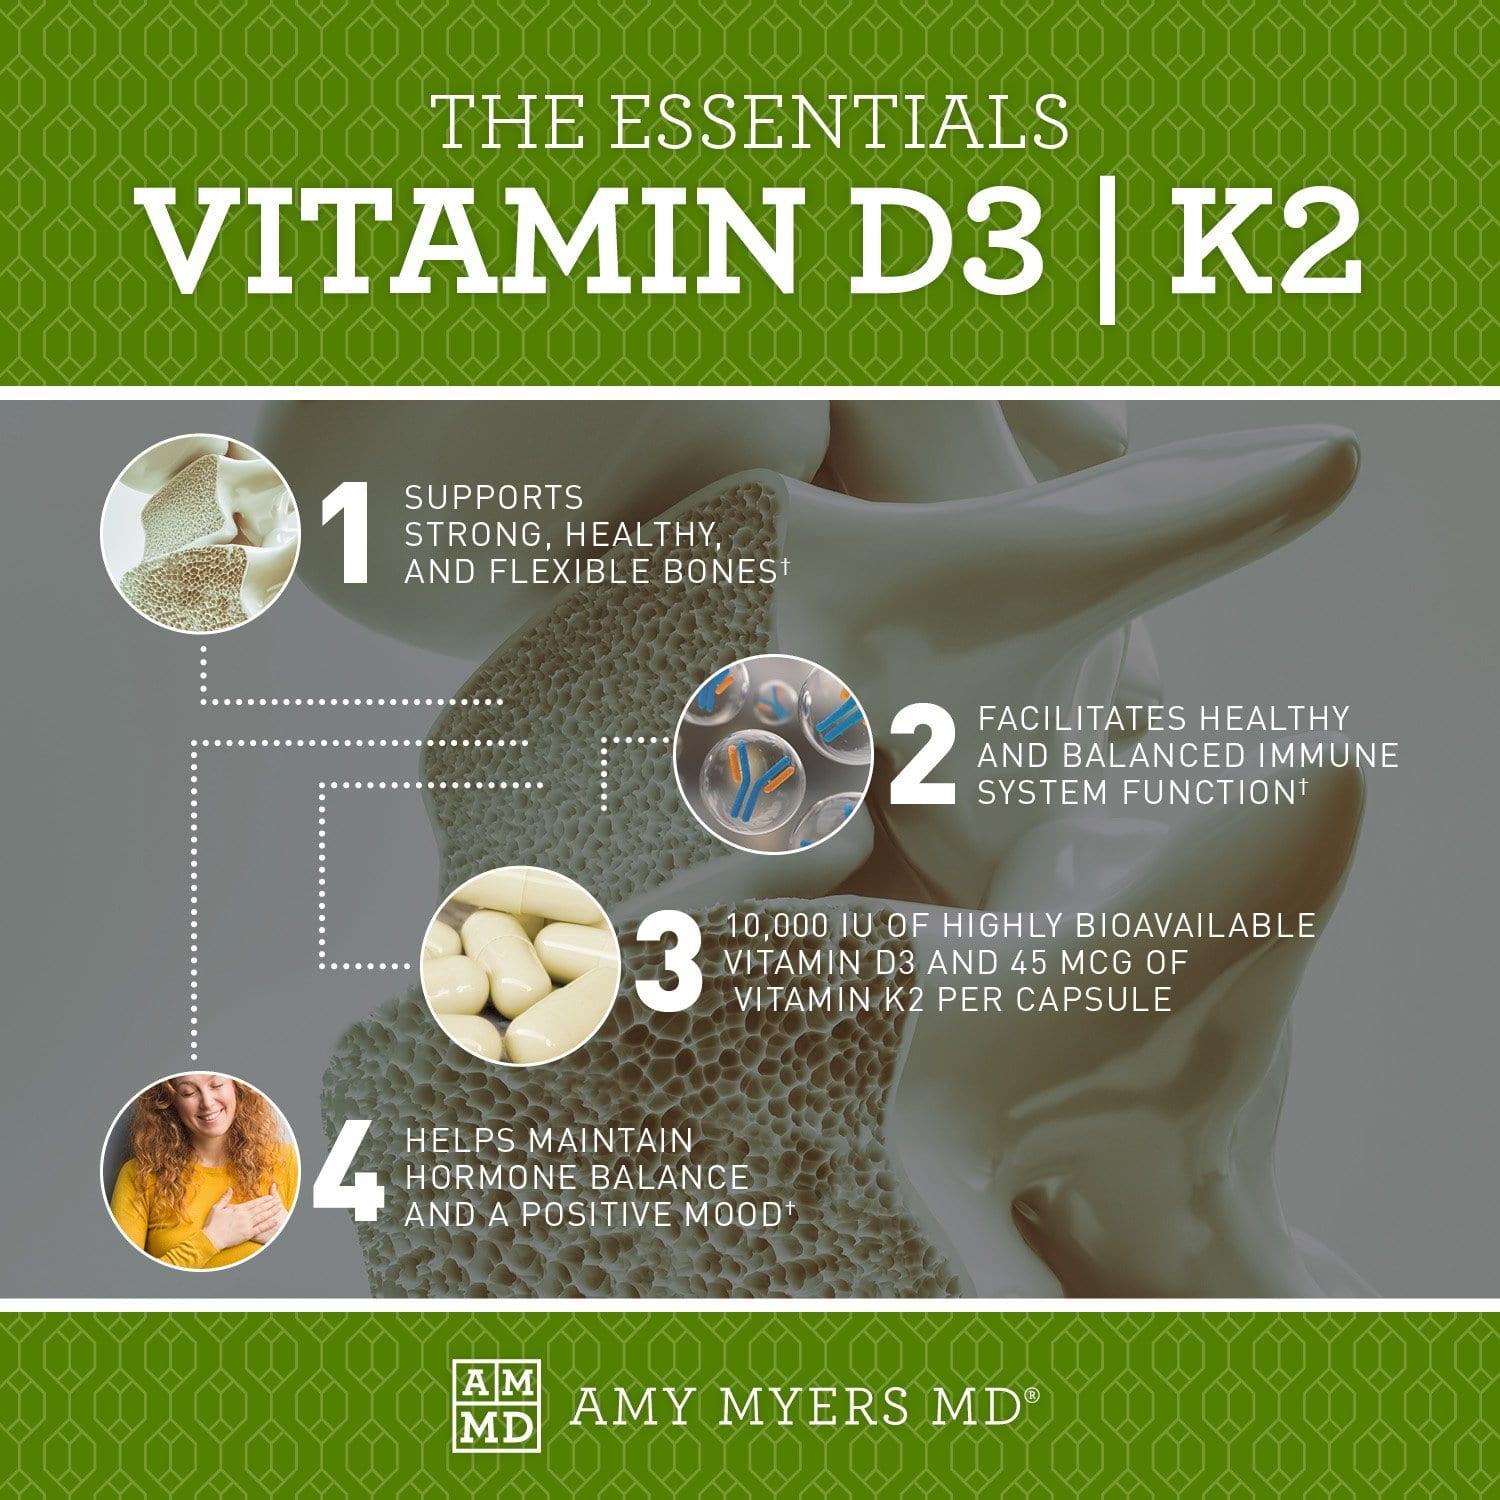 4 essential Benefits of Vitamin D3 with K2 (MK7) - Infographic - Amy Myers MD®